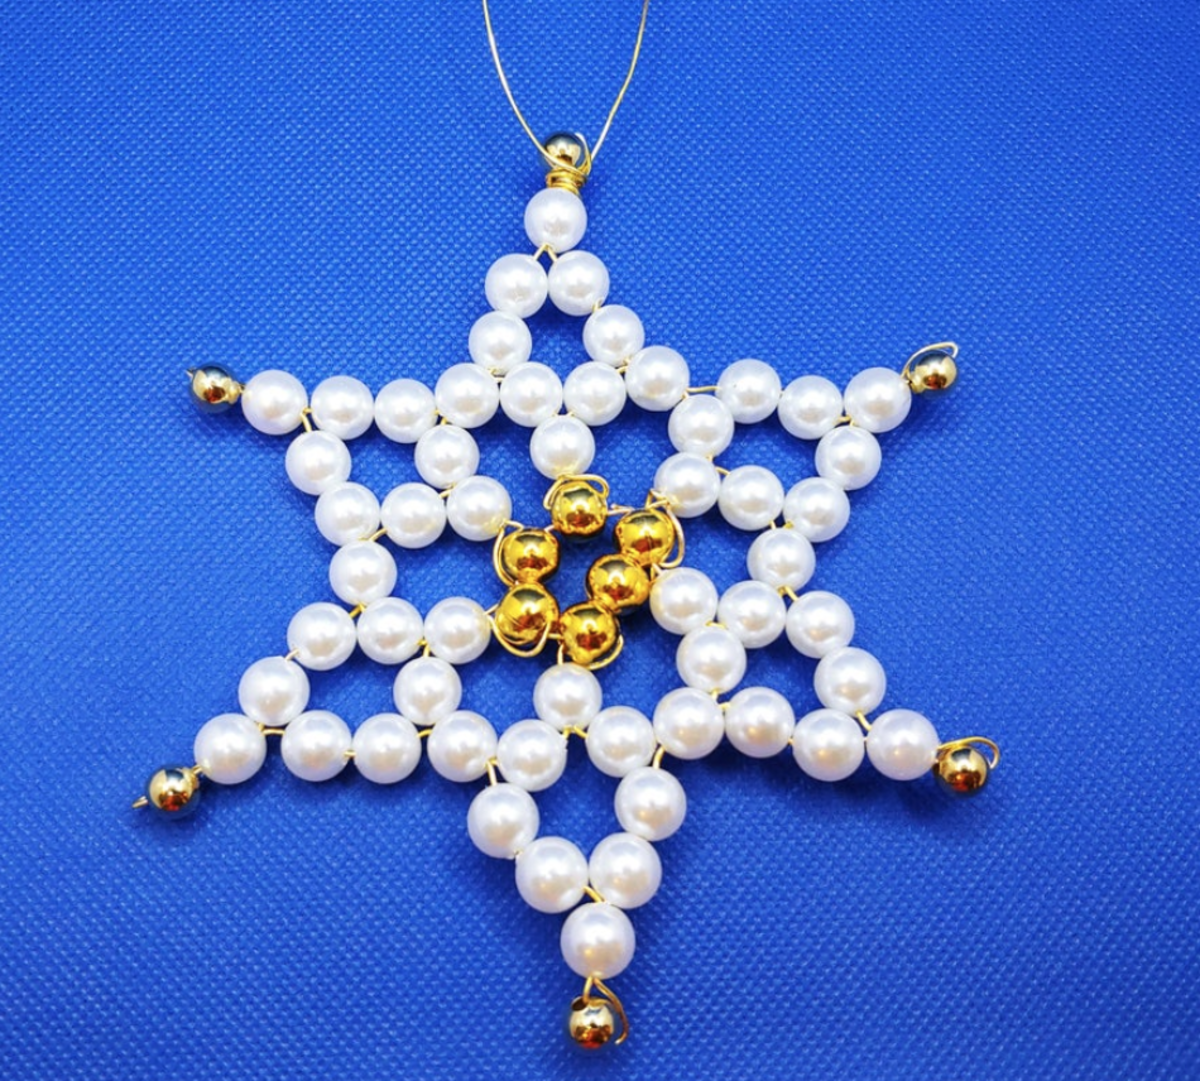 Six pointed Star Chrismon 